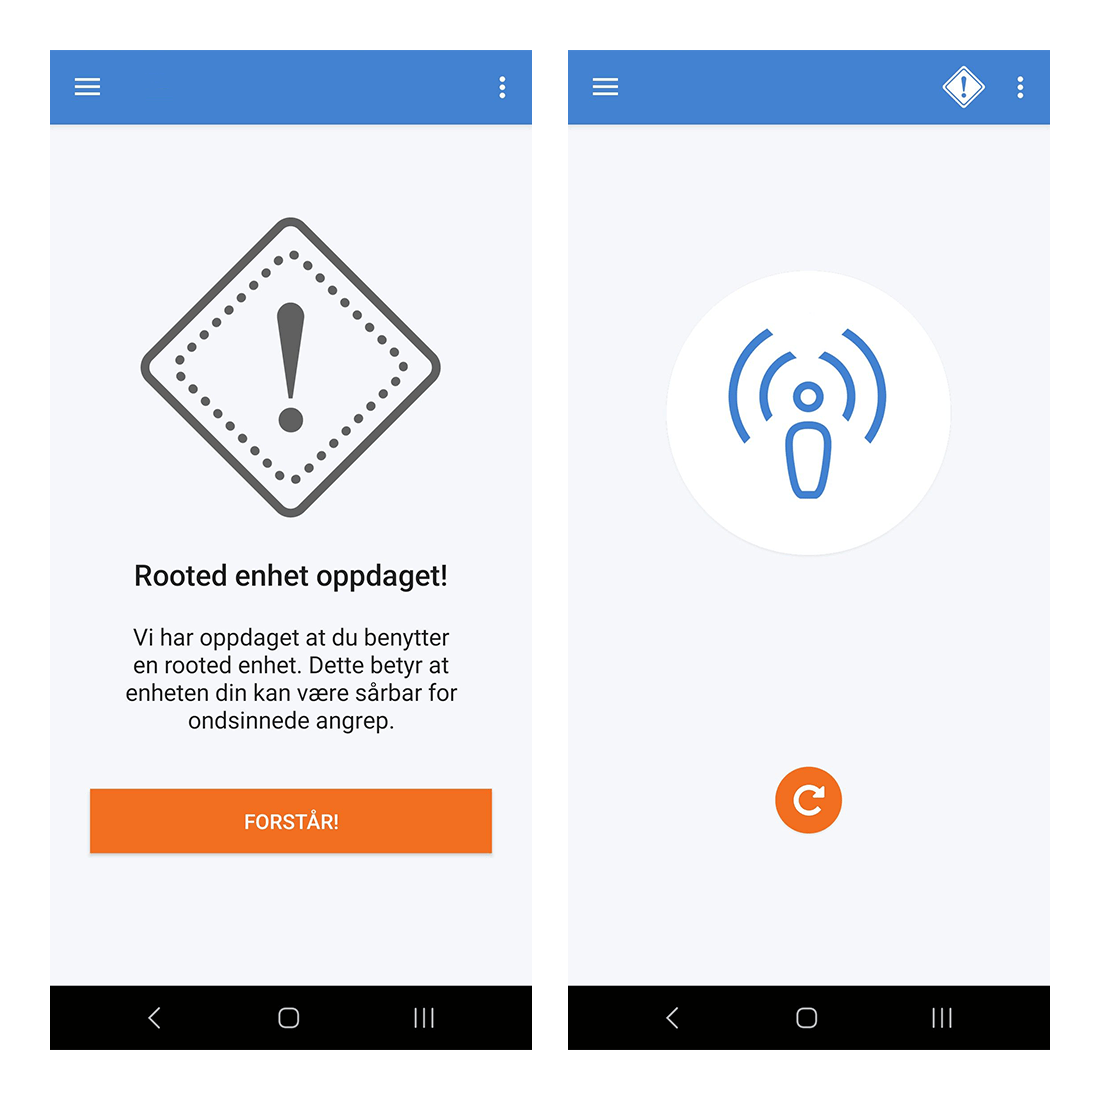 Rooted device warning on start-up (left) and as a notification after (right) click-to-zoom